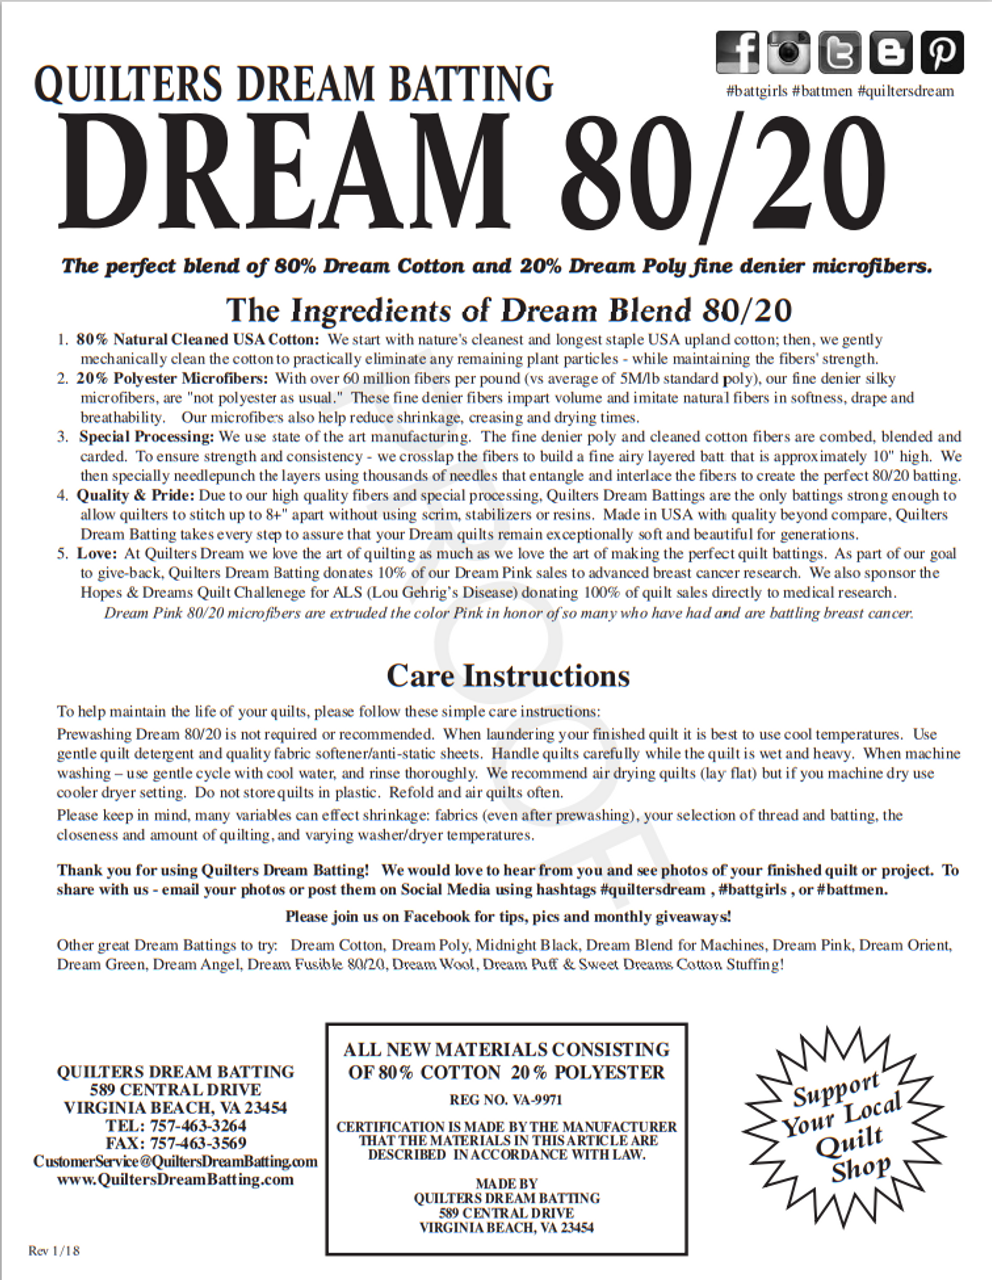 Quilters Dream 80/20 Batting with Fusible Webbing - Dianne Sews and More